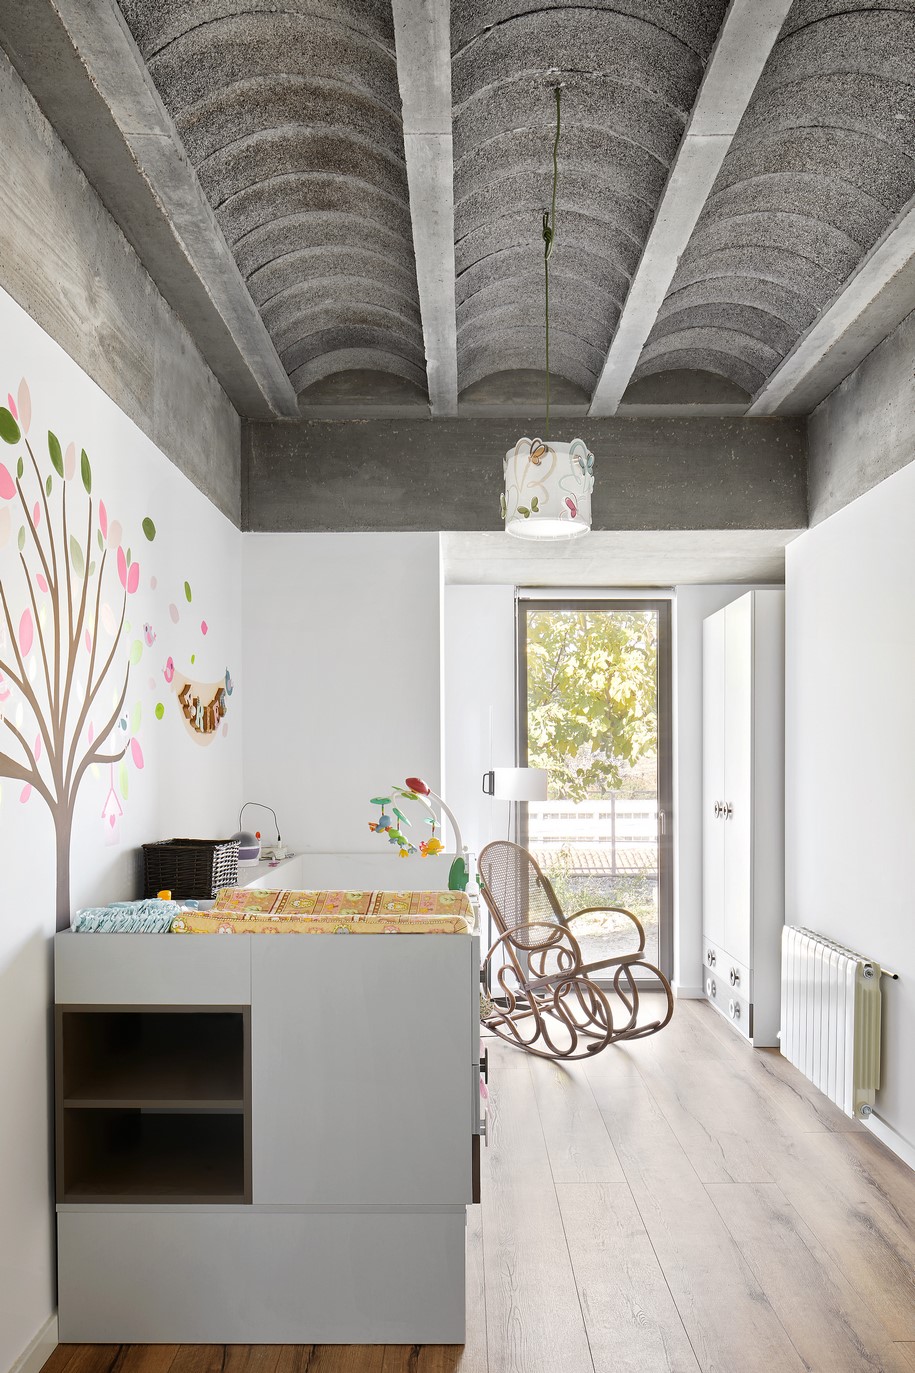 Archisearch Carles Marcos designed Marian, a family house in Ullastrell